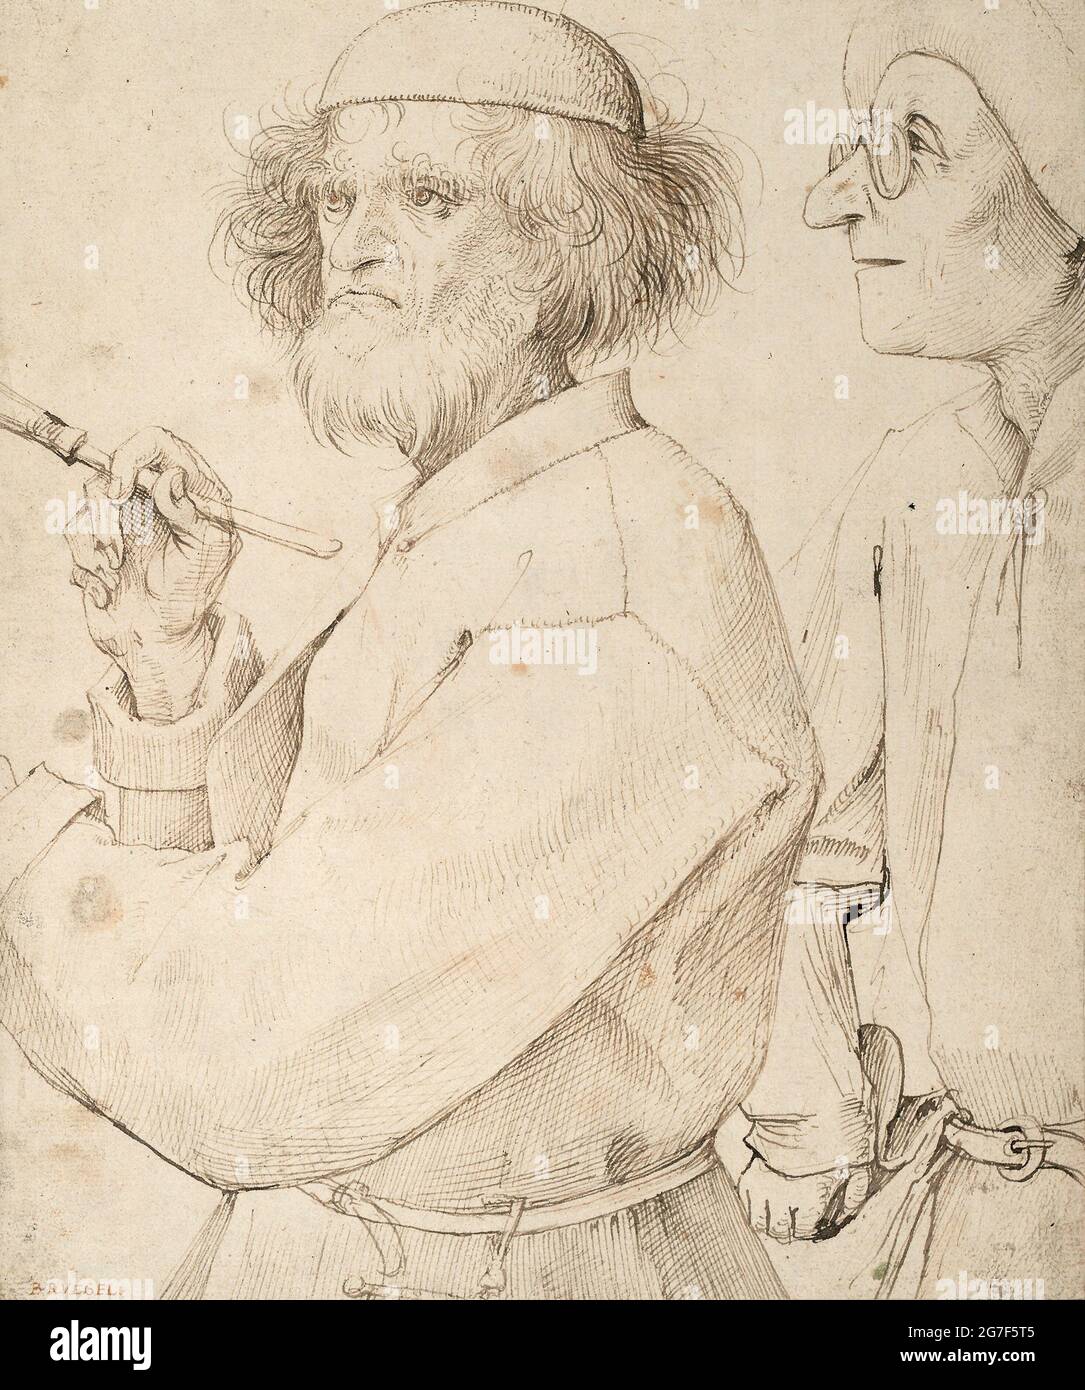 Pieter Bruegel the Elder - The Painter and the Buyer, 1566 - thought to be a self portrait of Pieter Brueghel the Elder Stock Photo